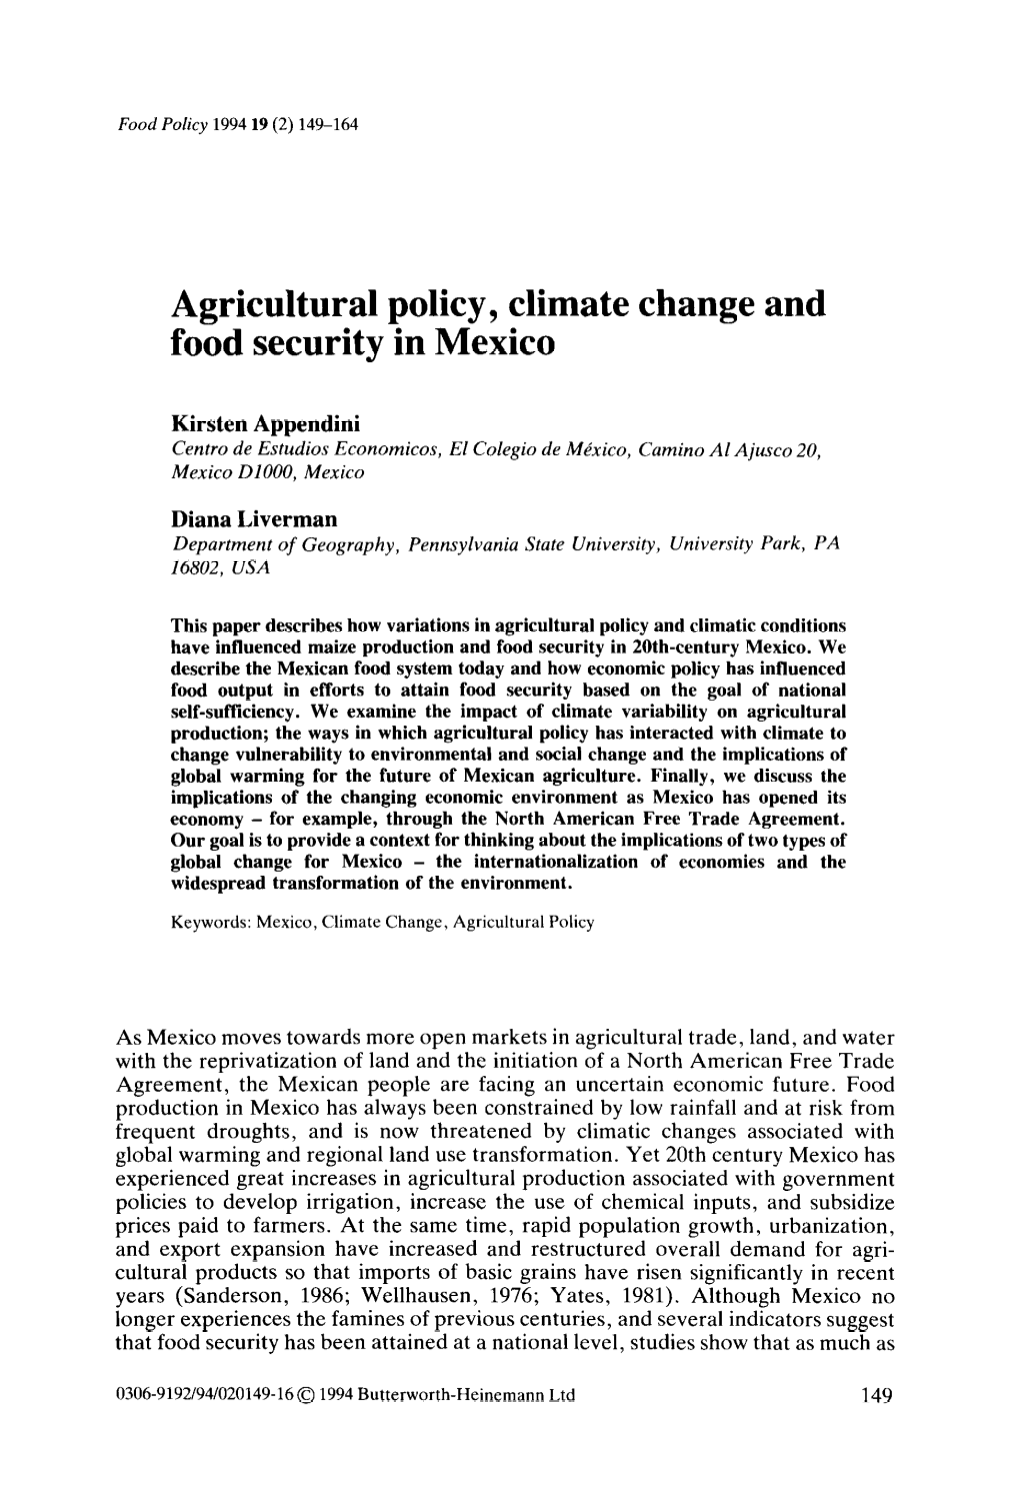 Agricultural Policy, Climate Change and Food Security in Mexico